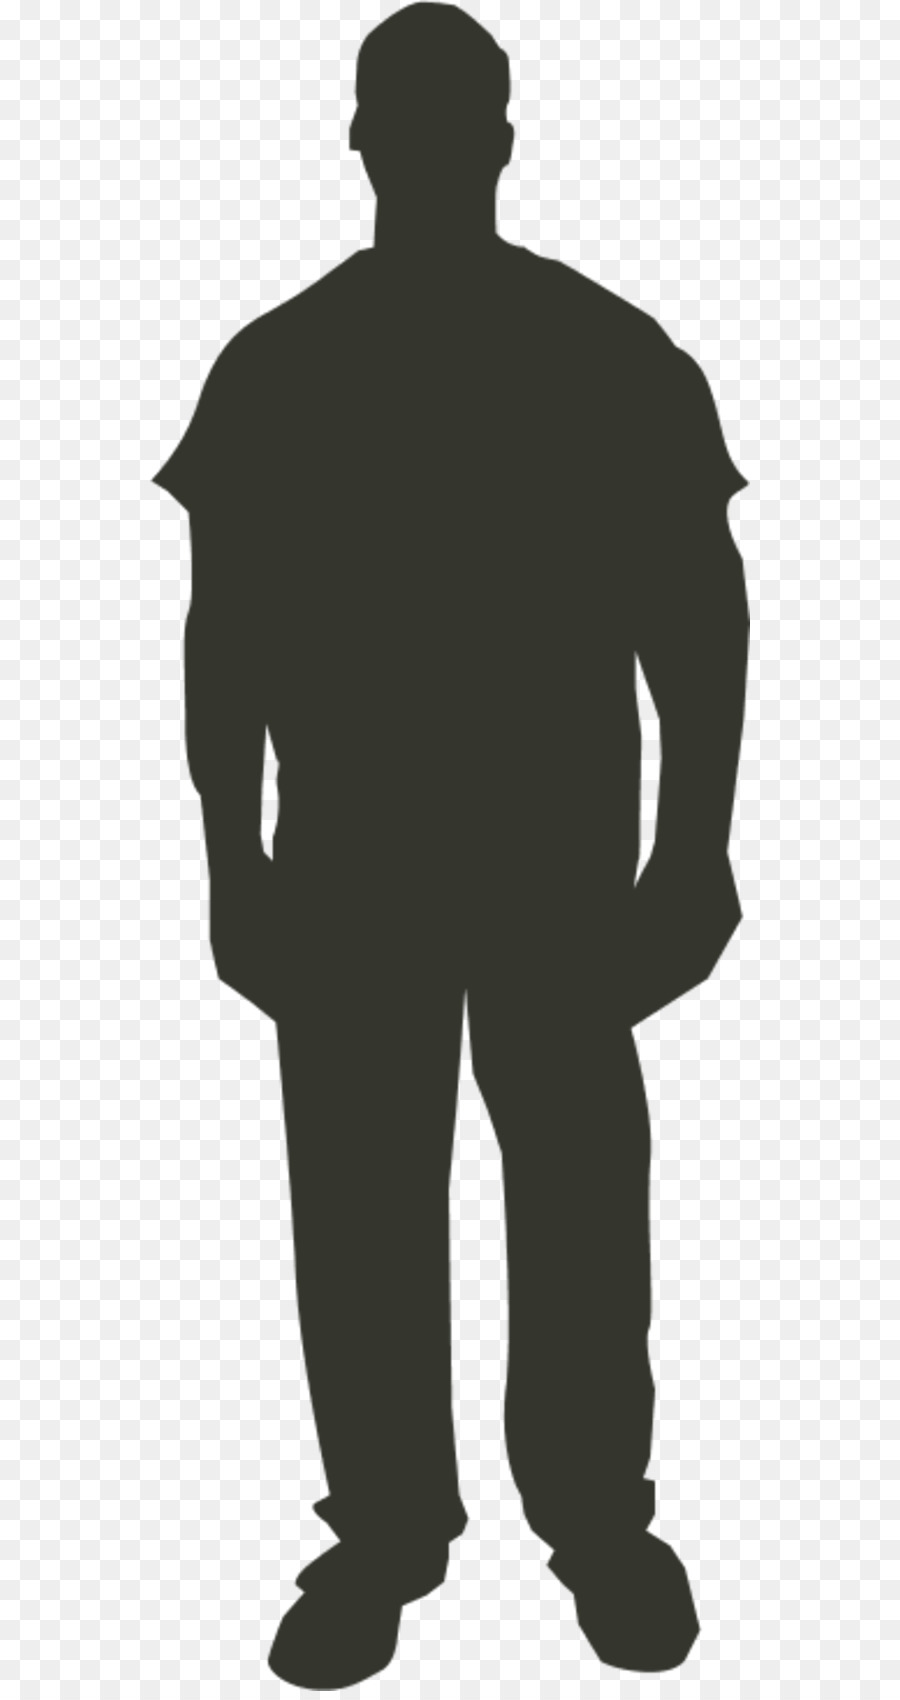 Silhouette Person Silhouette Png Download Free Transparent Silhouette Png Download